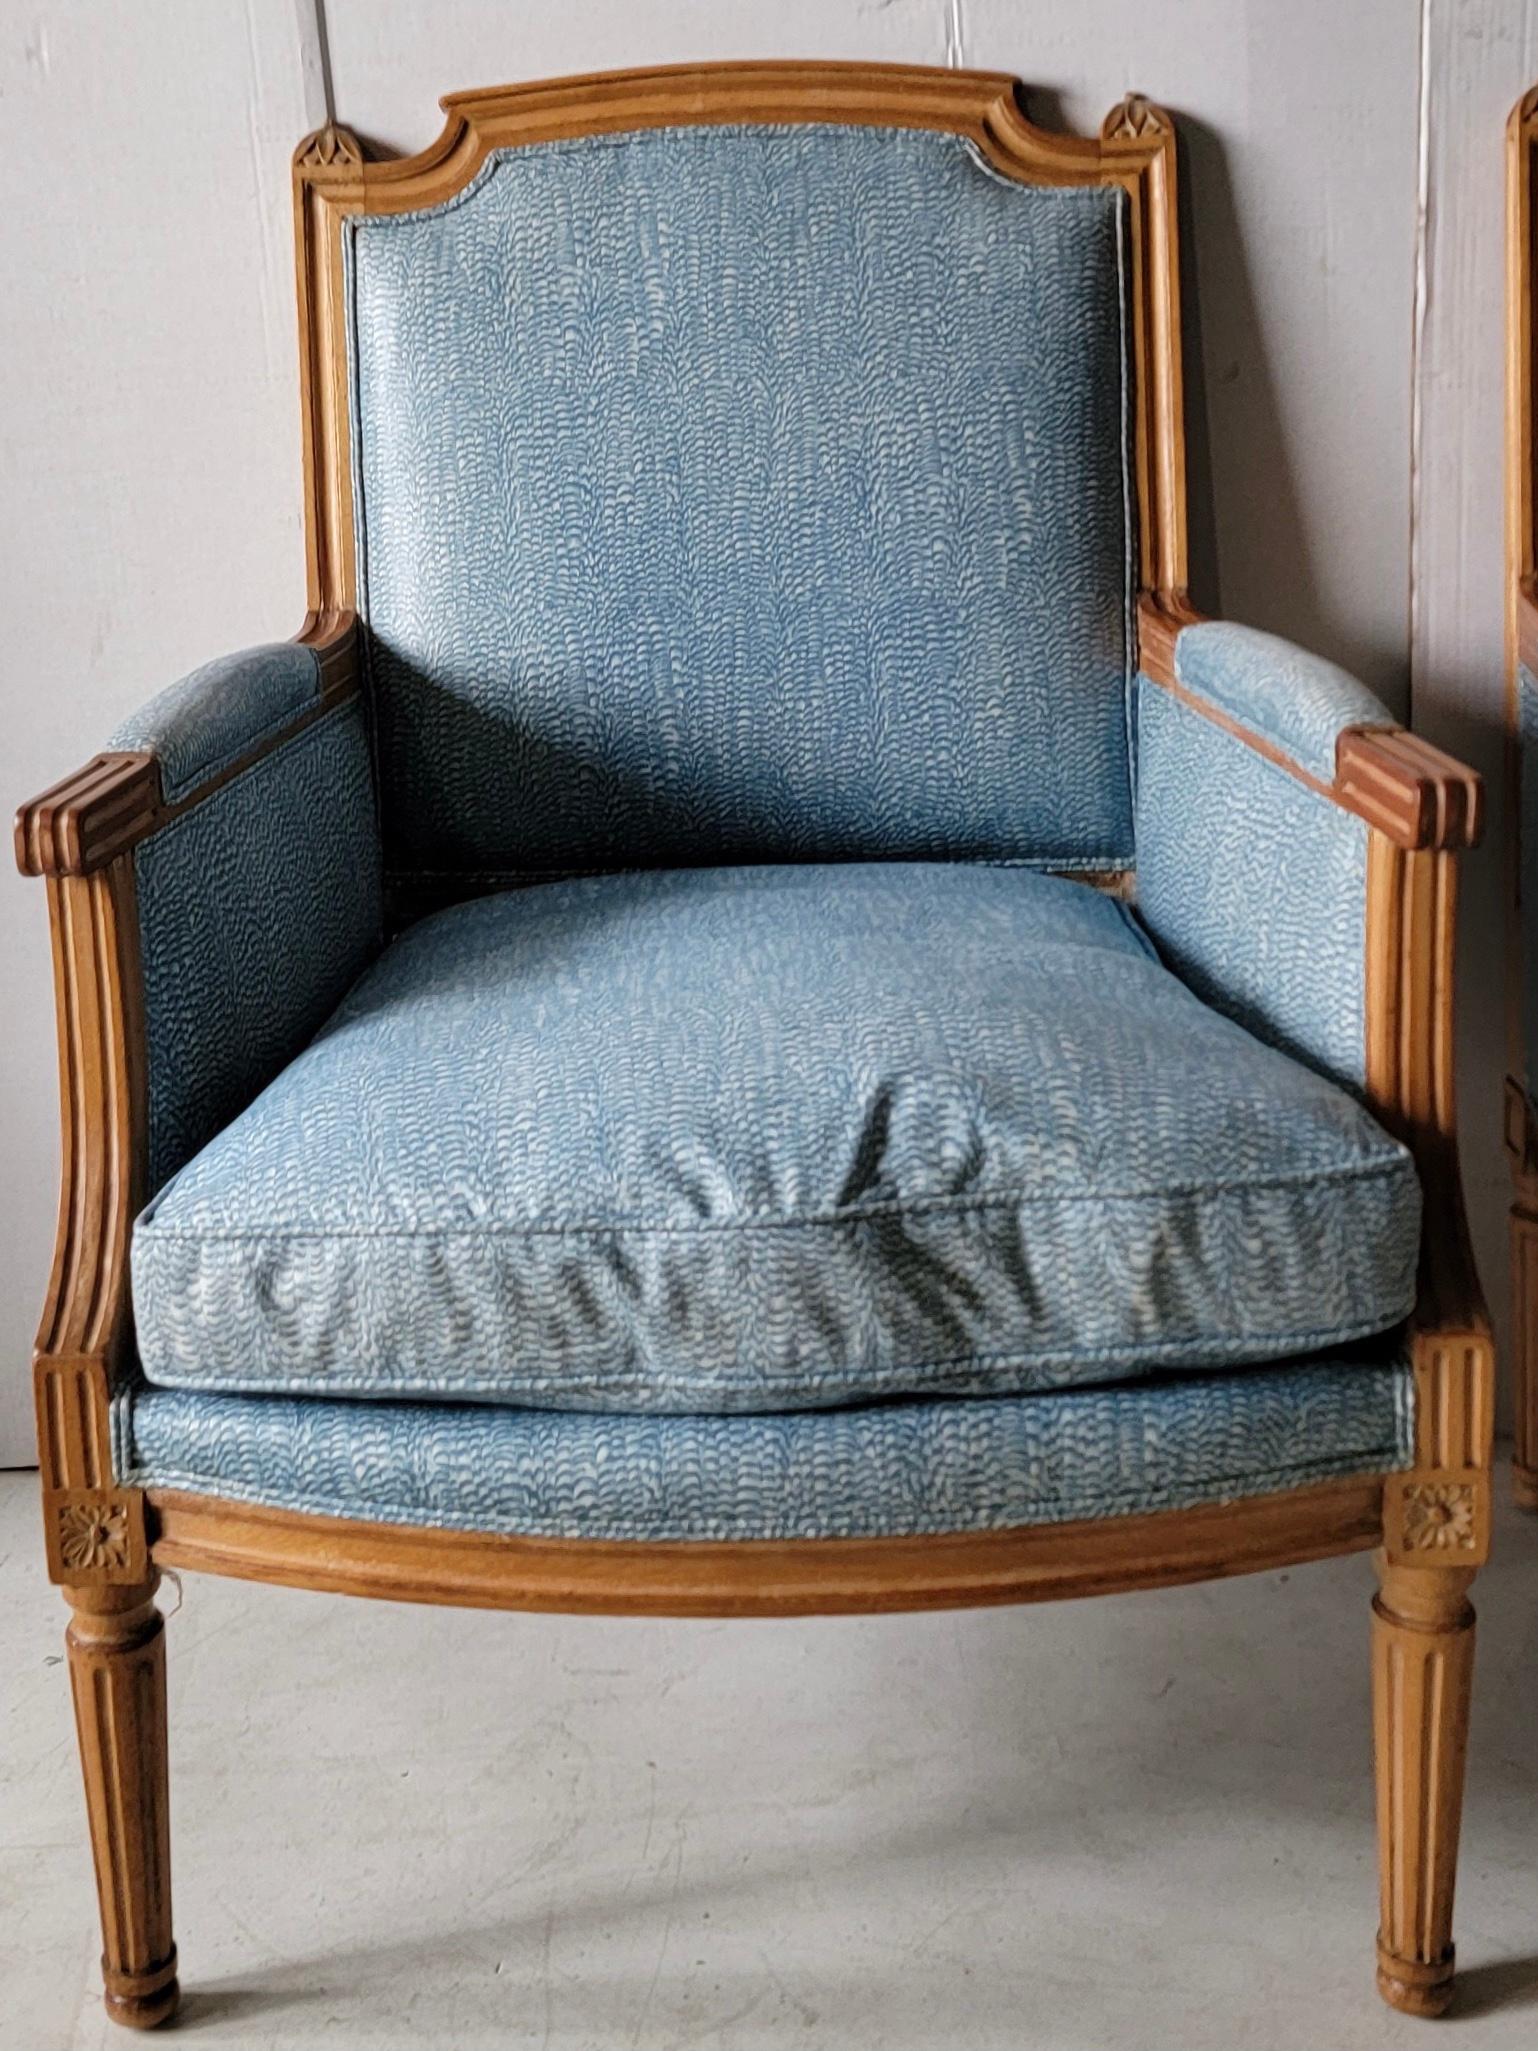 This is a pair of French directoire style club chairs in a vintage blue and white chintz. The frame is a cerused oak, and the cushions are down. Upholstery shows wear with no holes.